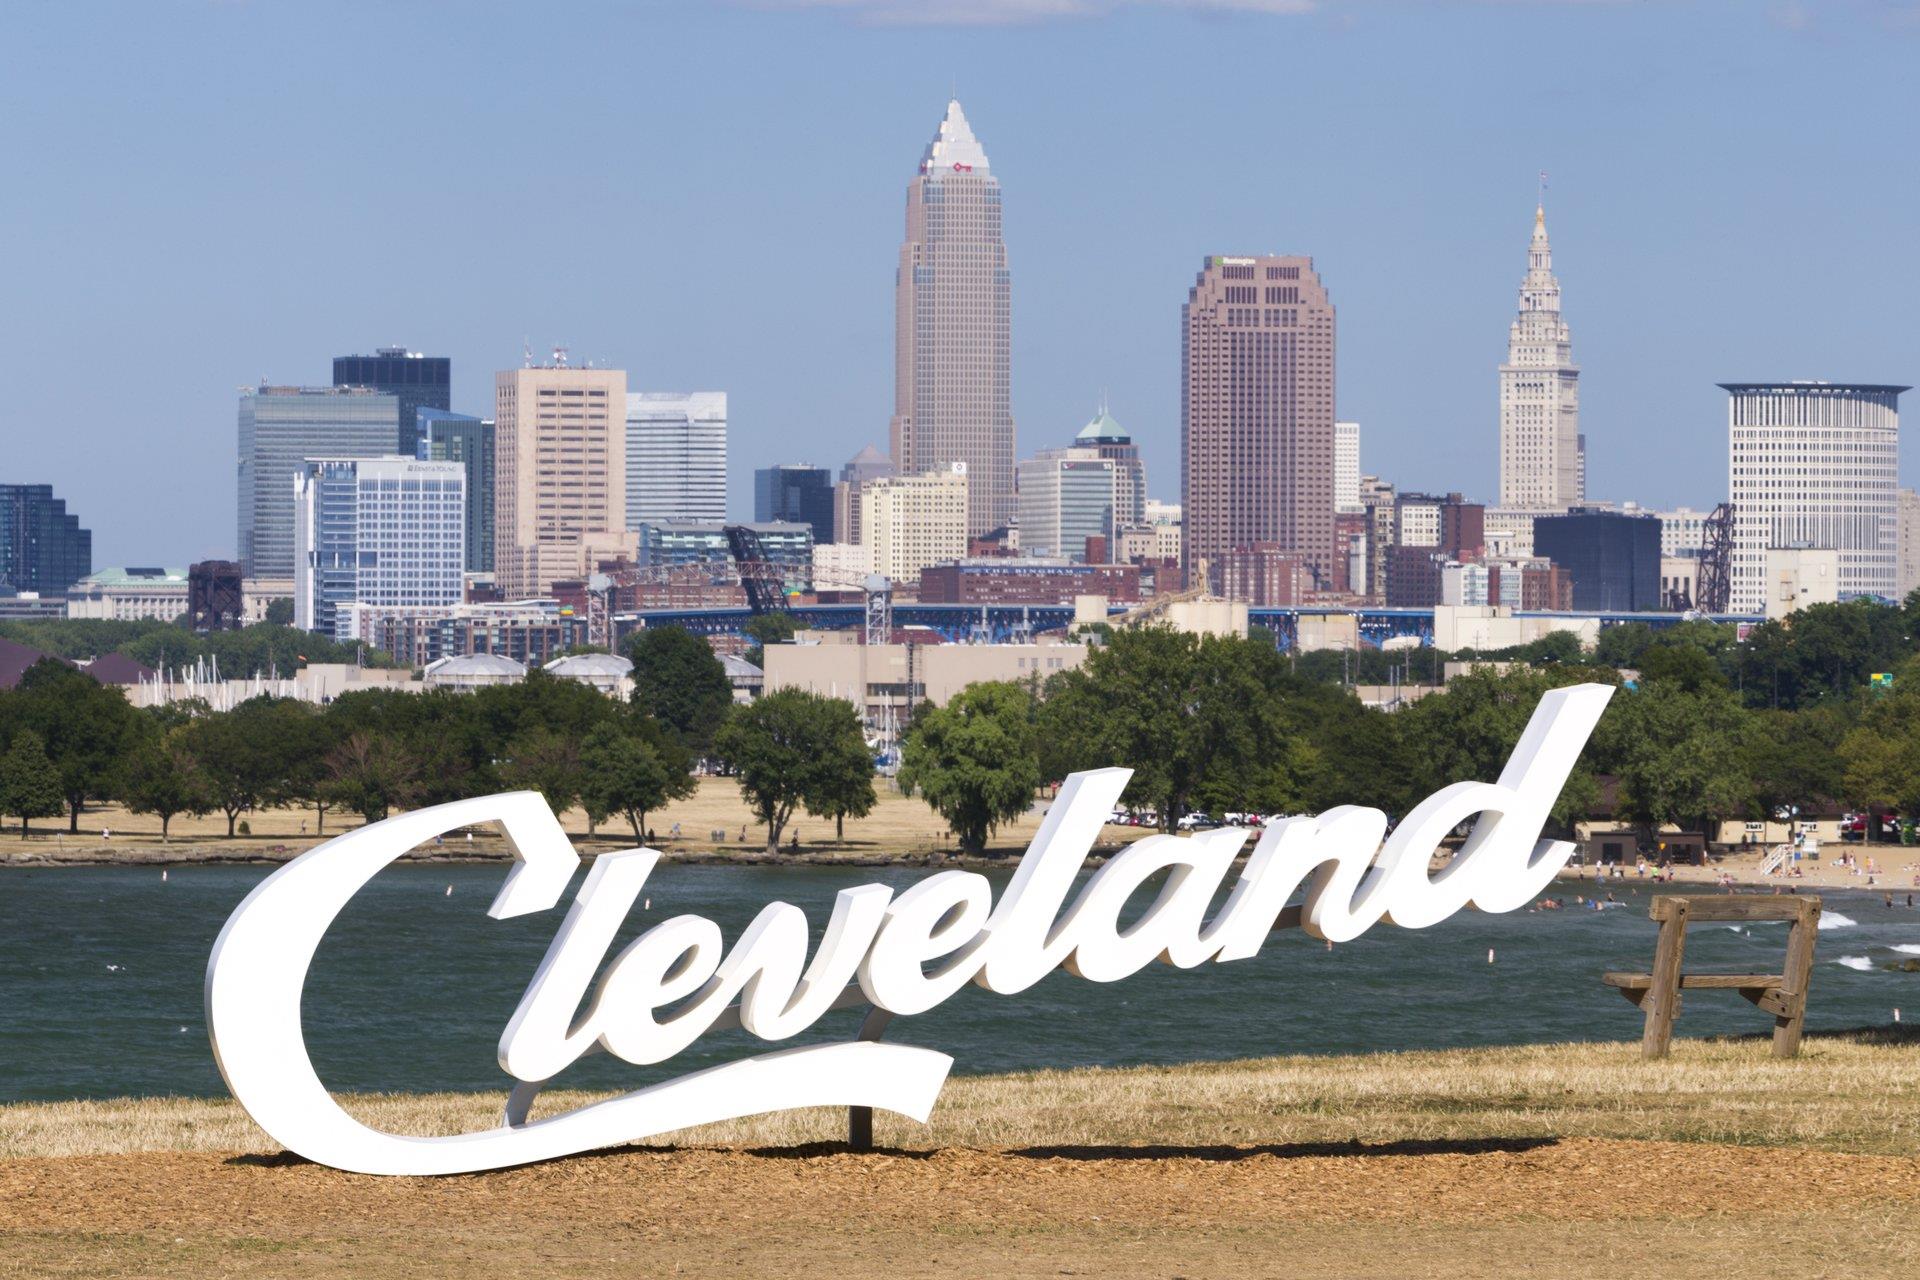 USA Today/10Best Features "10 Things You Might Not Know About Clevelan...